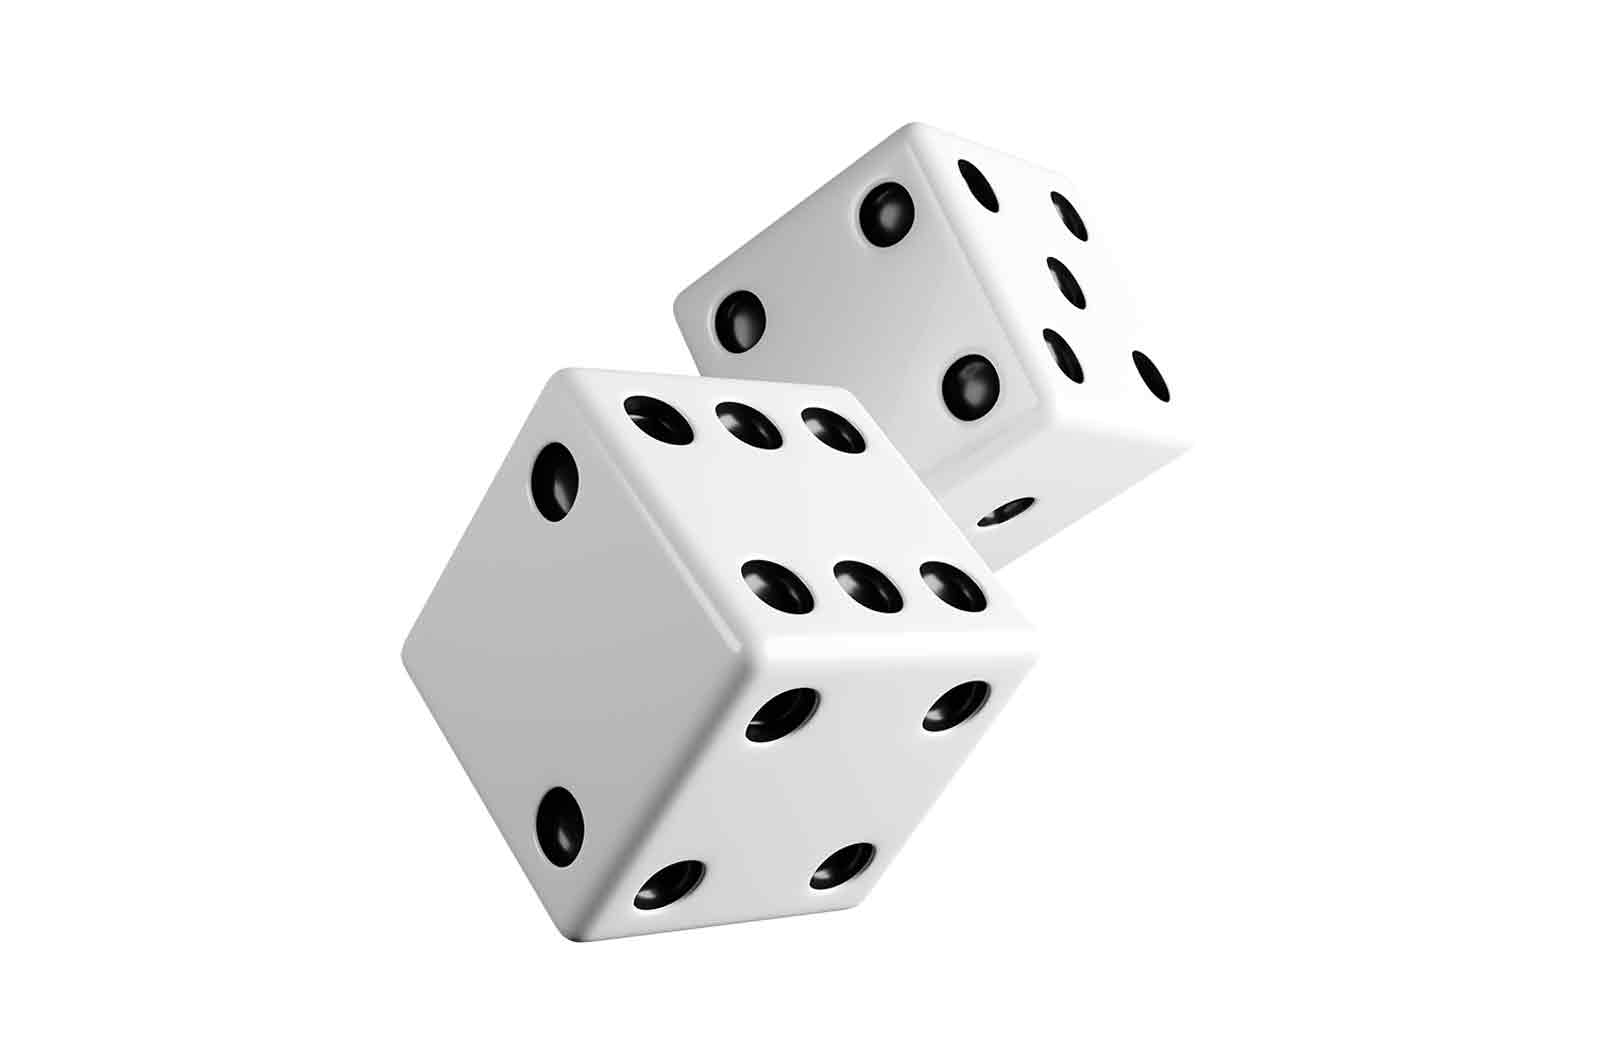 Dice Roll, 3D Rendered Illustration of two white dice with black dots in mid-air, showing six and two. The image represents chance, luck, gambling, and probability.